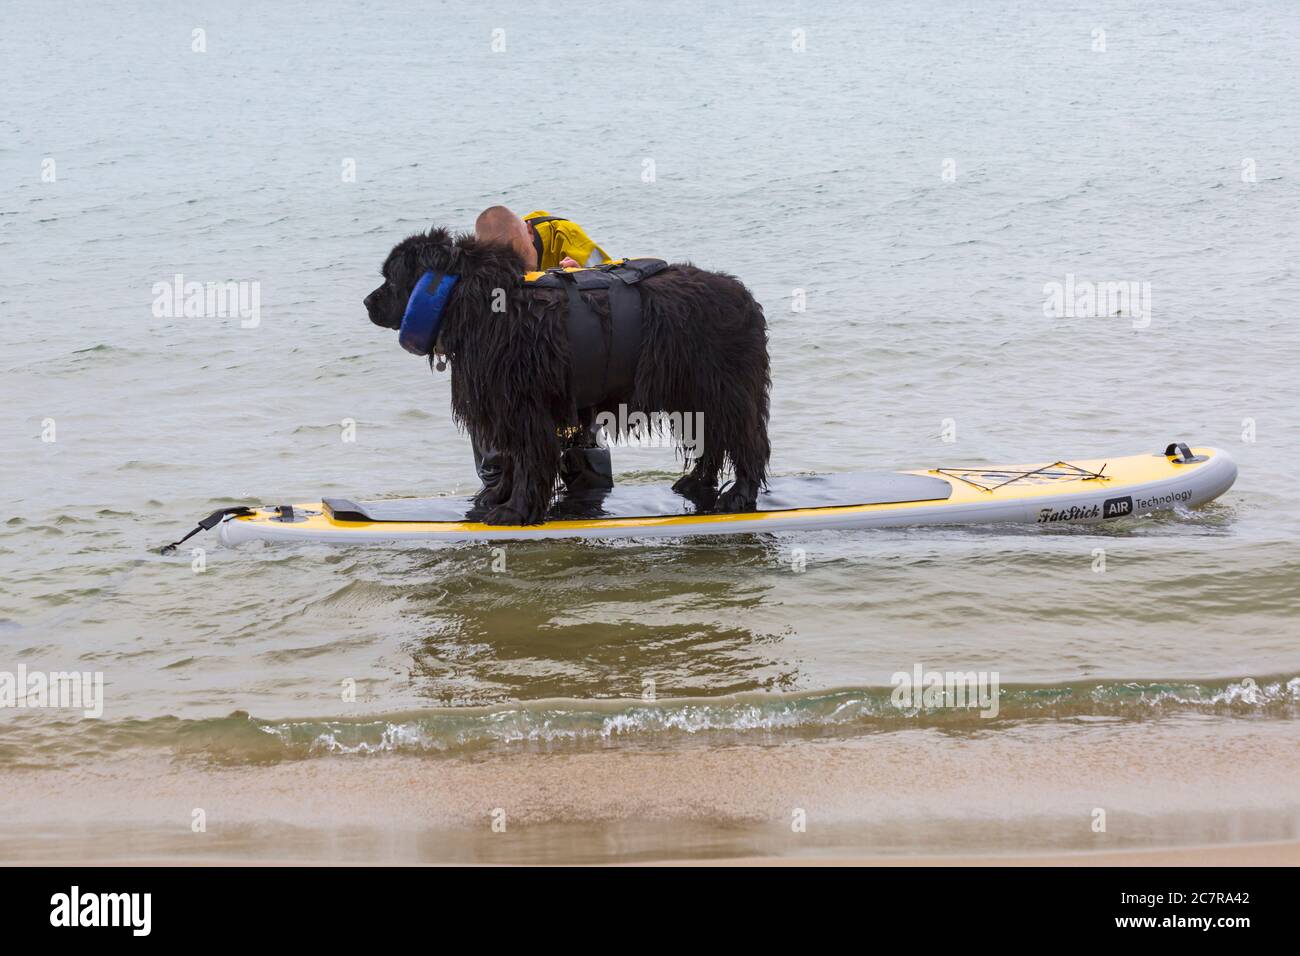 Poole, Dorset UK. 19th July 2020. Dog training sessions on the beach with dogs learning to paddleboard and increase their confidence in the sea. Newfoundland dog learning to paddleboard. Newfoundland dog standing on paddleboard. Credit: Carolyn Jenkins/Alamy Live News Stock Photo